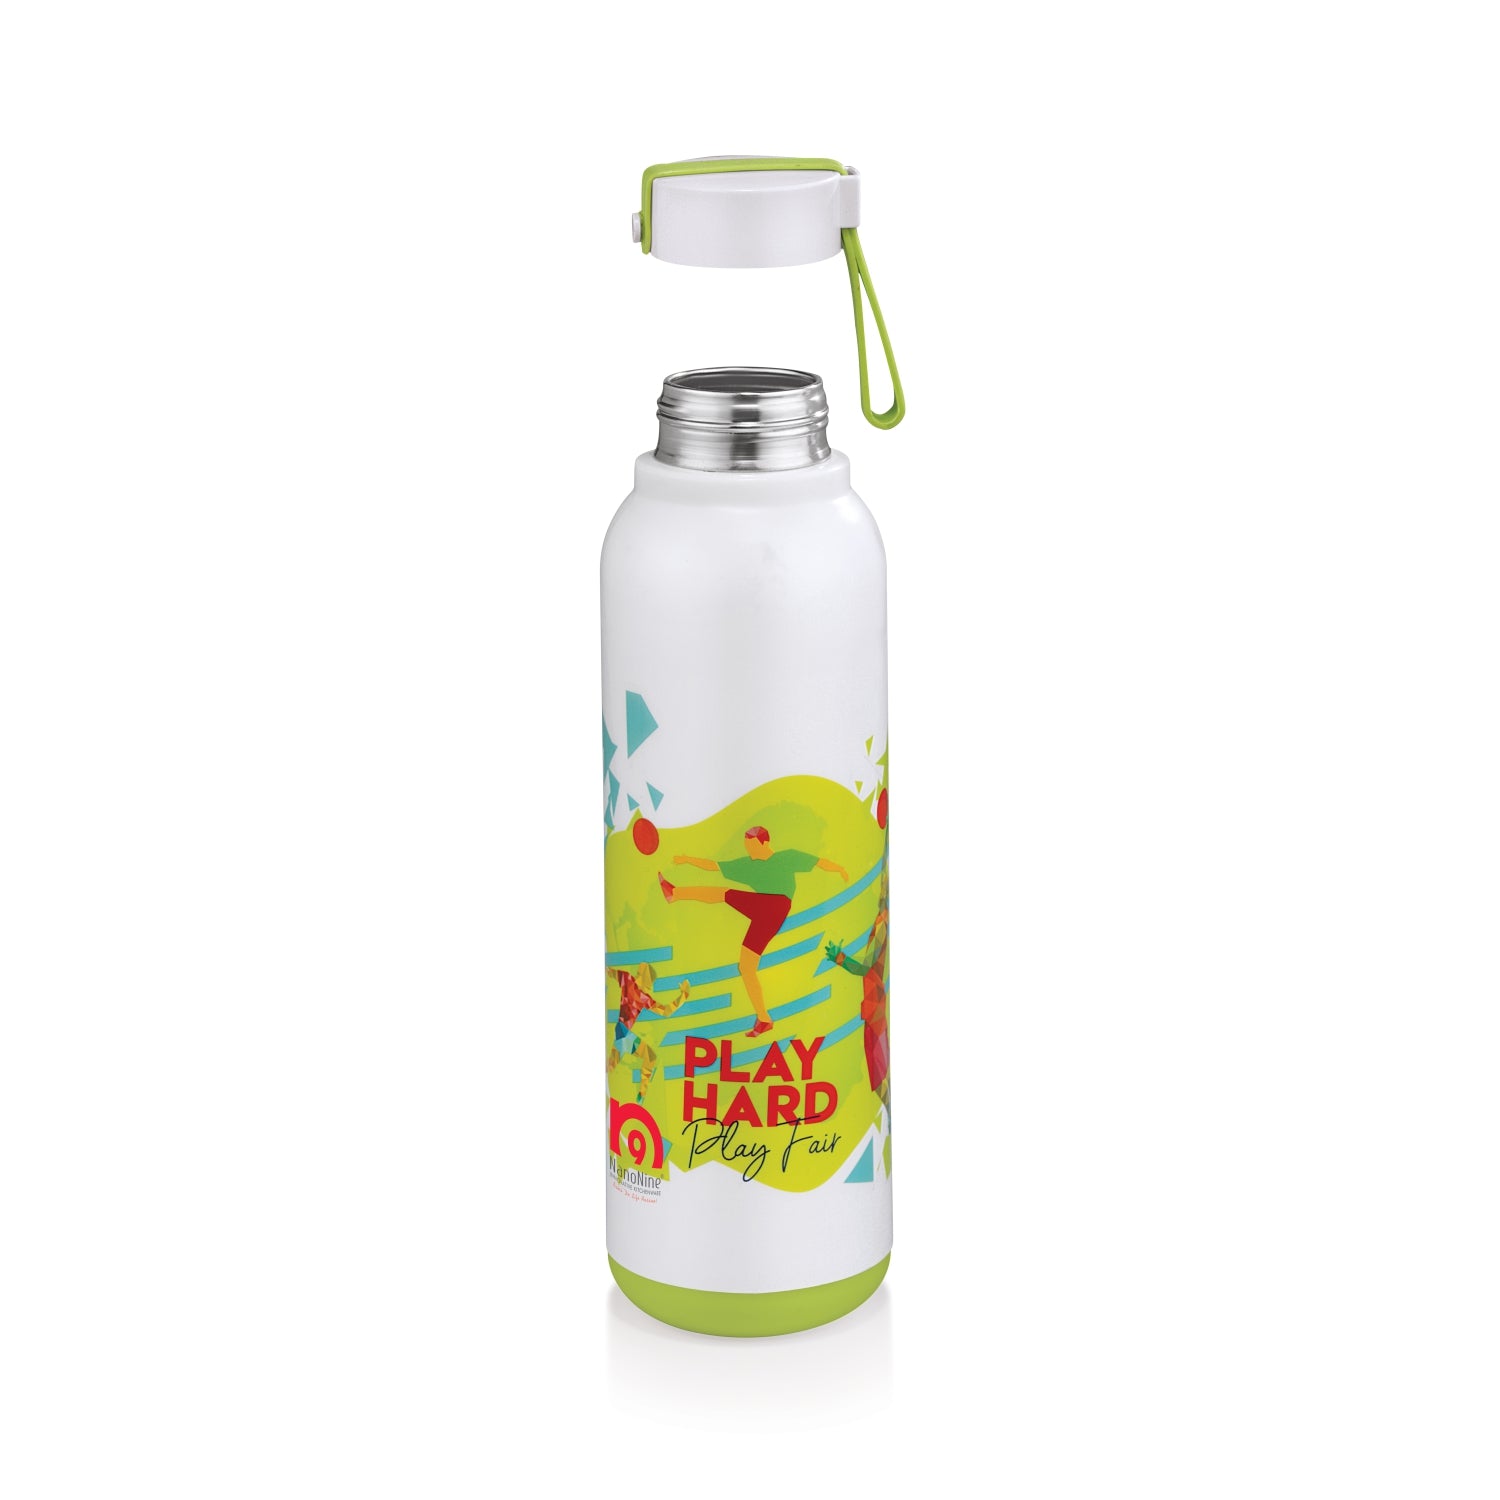 NanoNine Uni Steel 700ml (Play Hard Play Fair Green) Double Wall Insulated Stainless Steel Bottle.